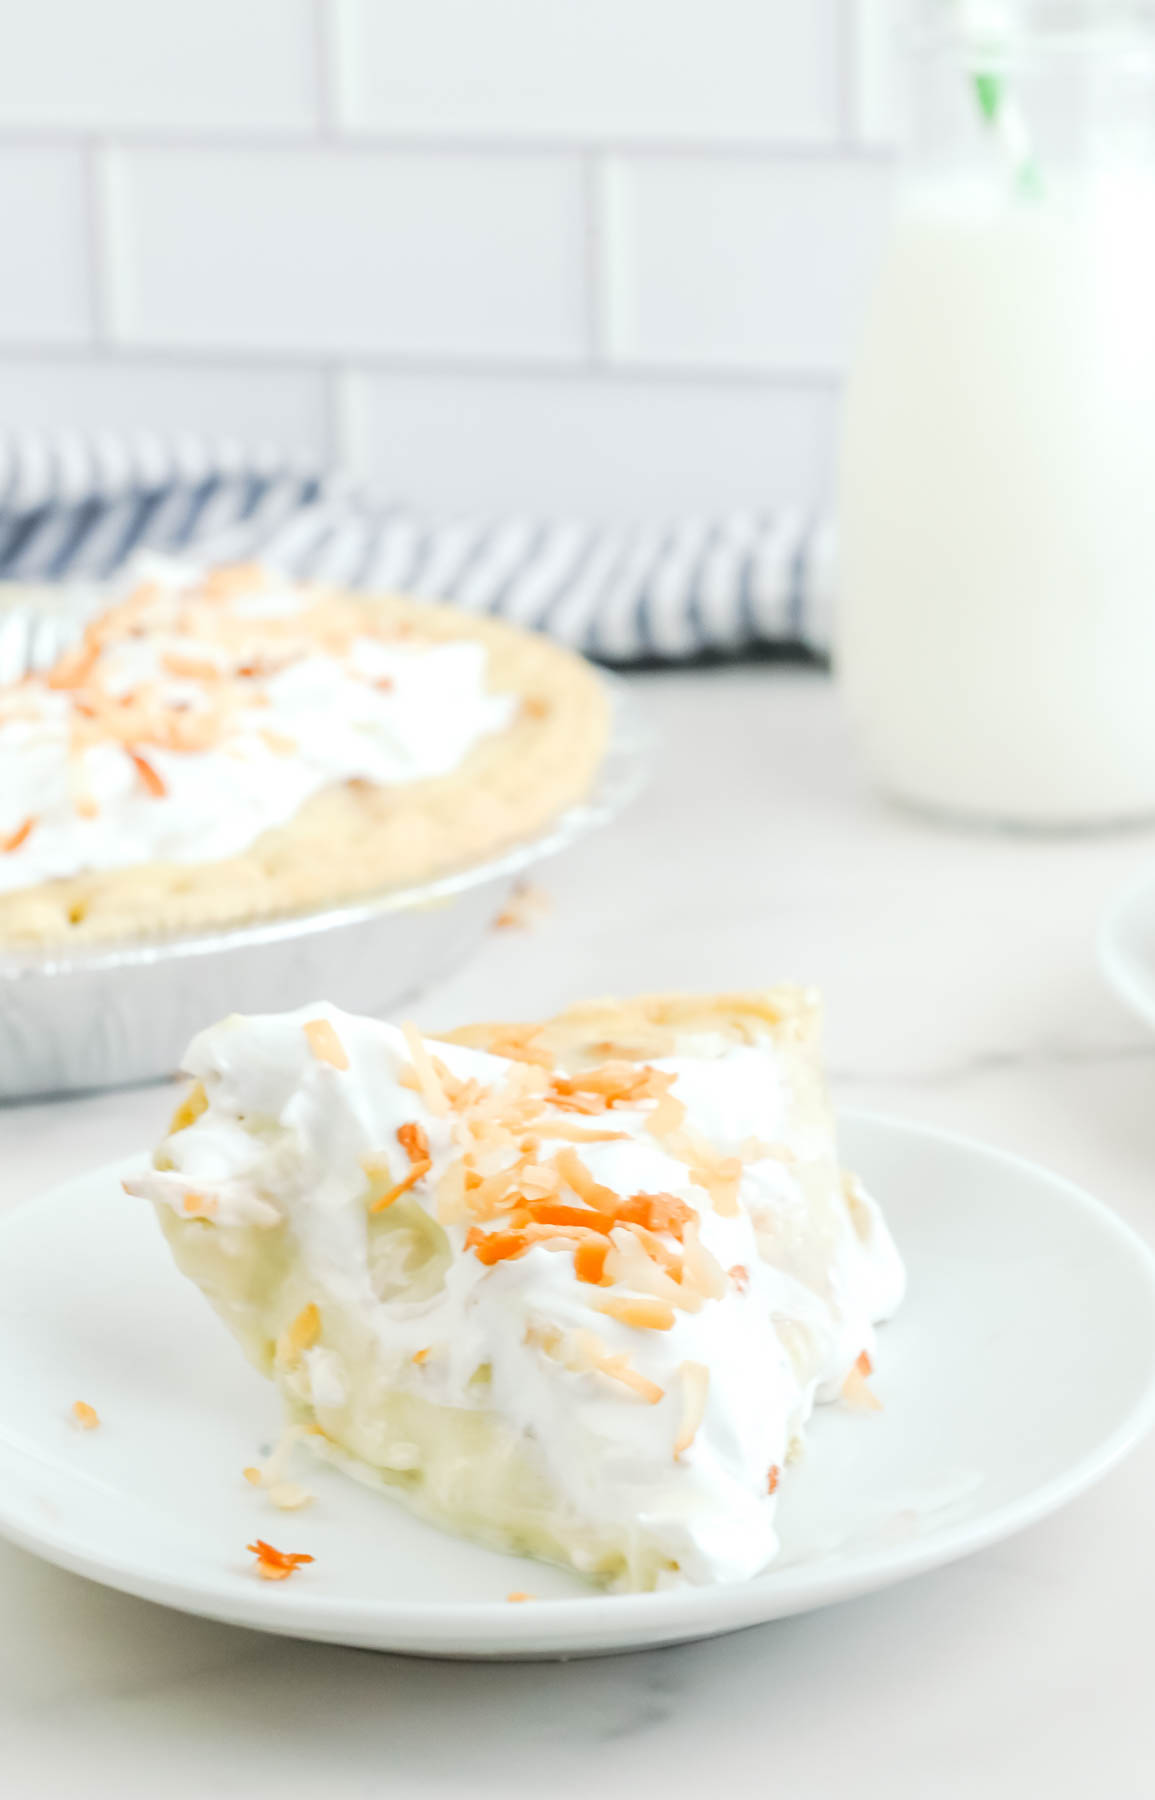 A slice of coconut cream pie on a plate.